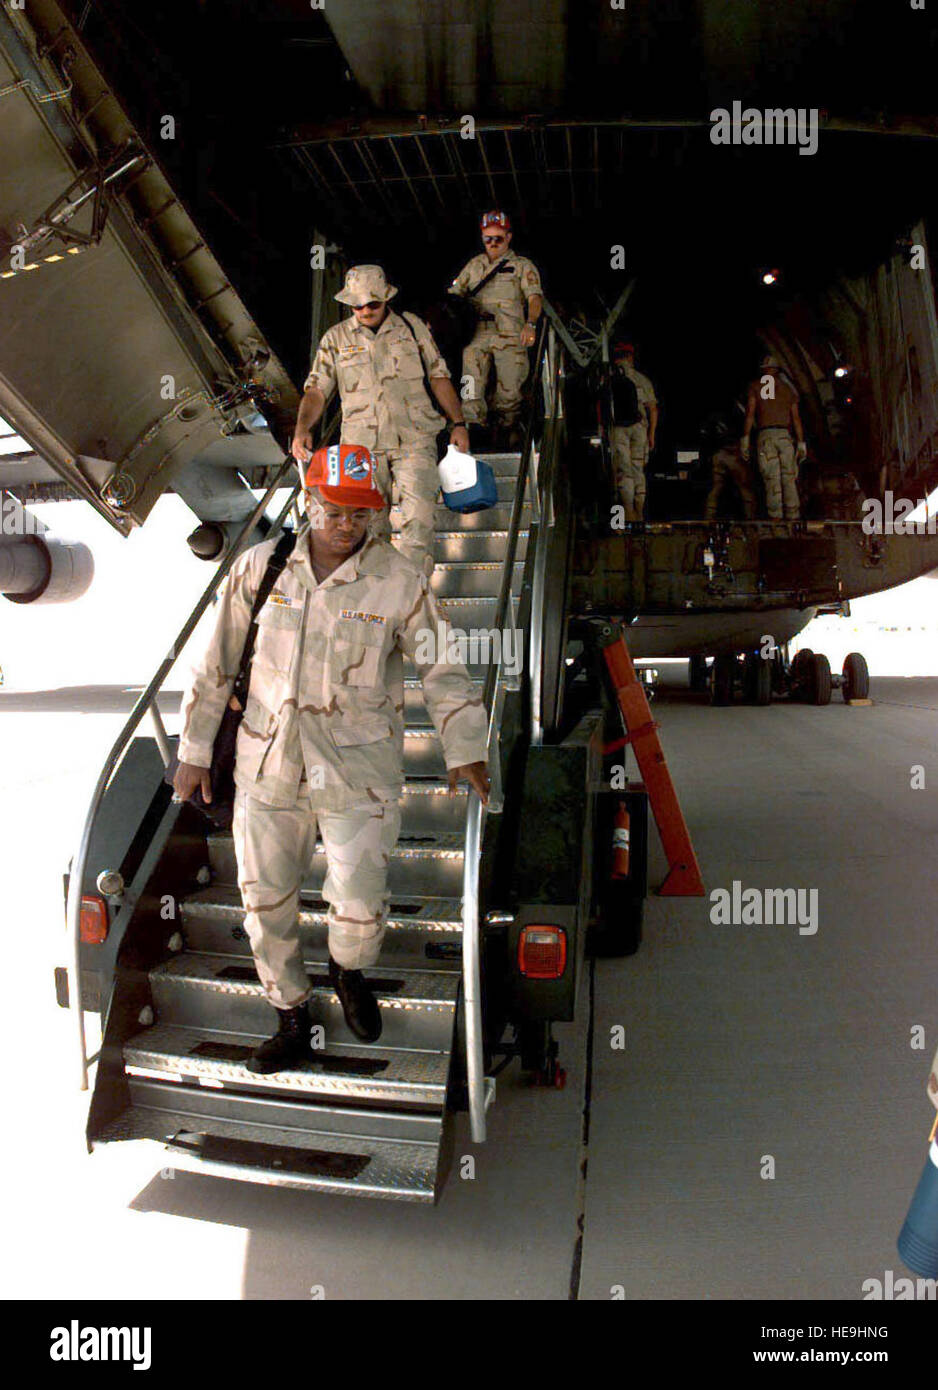 960807-F-2829R-005  U.S. Air Force engineers from the 823rd Red Horse Squadron step off of a C-5B Galaxy at Prince Sultan Air Base at Al Kharj, Saudi Arabia, on August 7, 1996.  The Galaxy is bringing in engineers, equipment and supplies to construct a tent city to house U.S. personnel conducting Operation Southern Watch.  Nearly 4,000 personnel, aircraft, and equipment are being moved from bases in Dhahran and Riyadh to the remote desert air base to reduce their vulnerability to terrorist attack.  Southern Watch is the U.S. and coalition enforcement of the no-fly-zone over Southern Iraq.  The Stock Photo